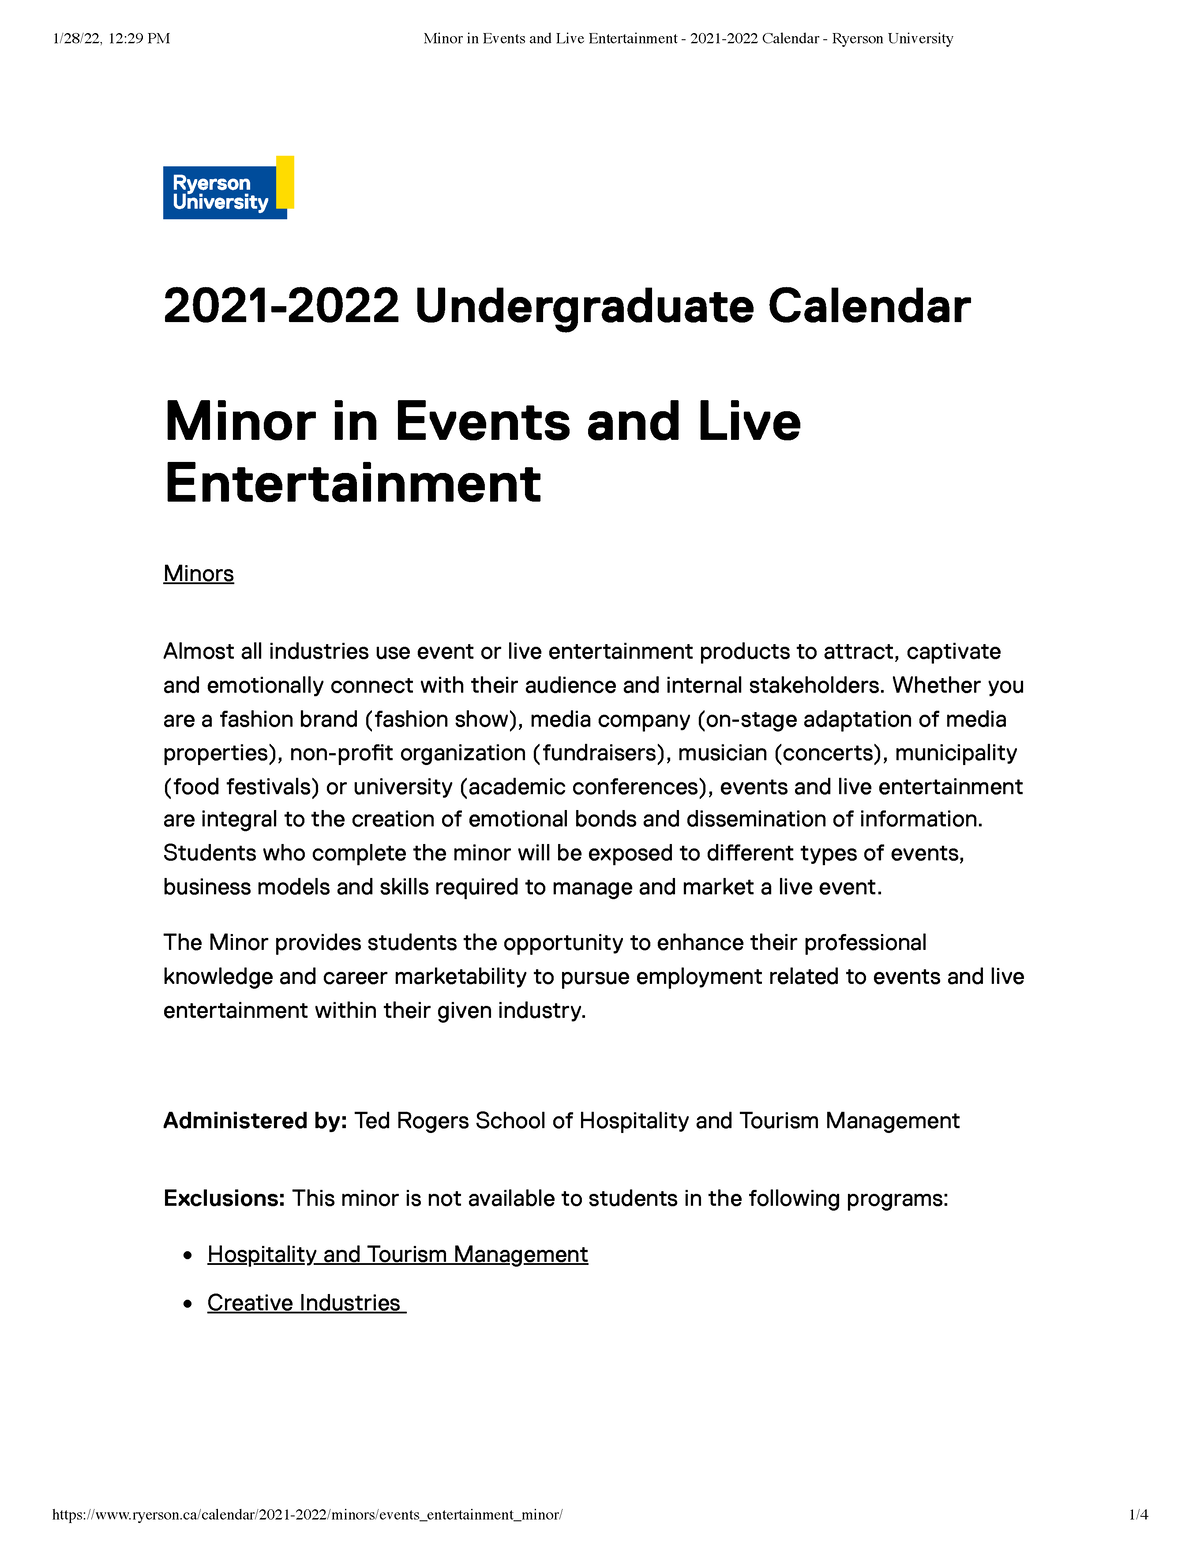 Minor in Events and Live Entertainment 20212022 Calendar Ryerson